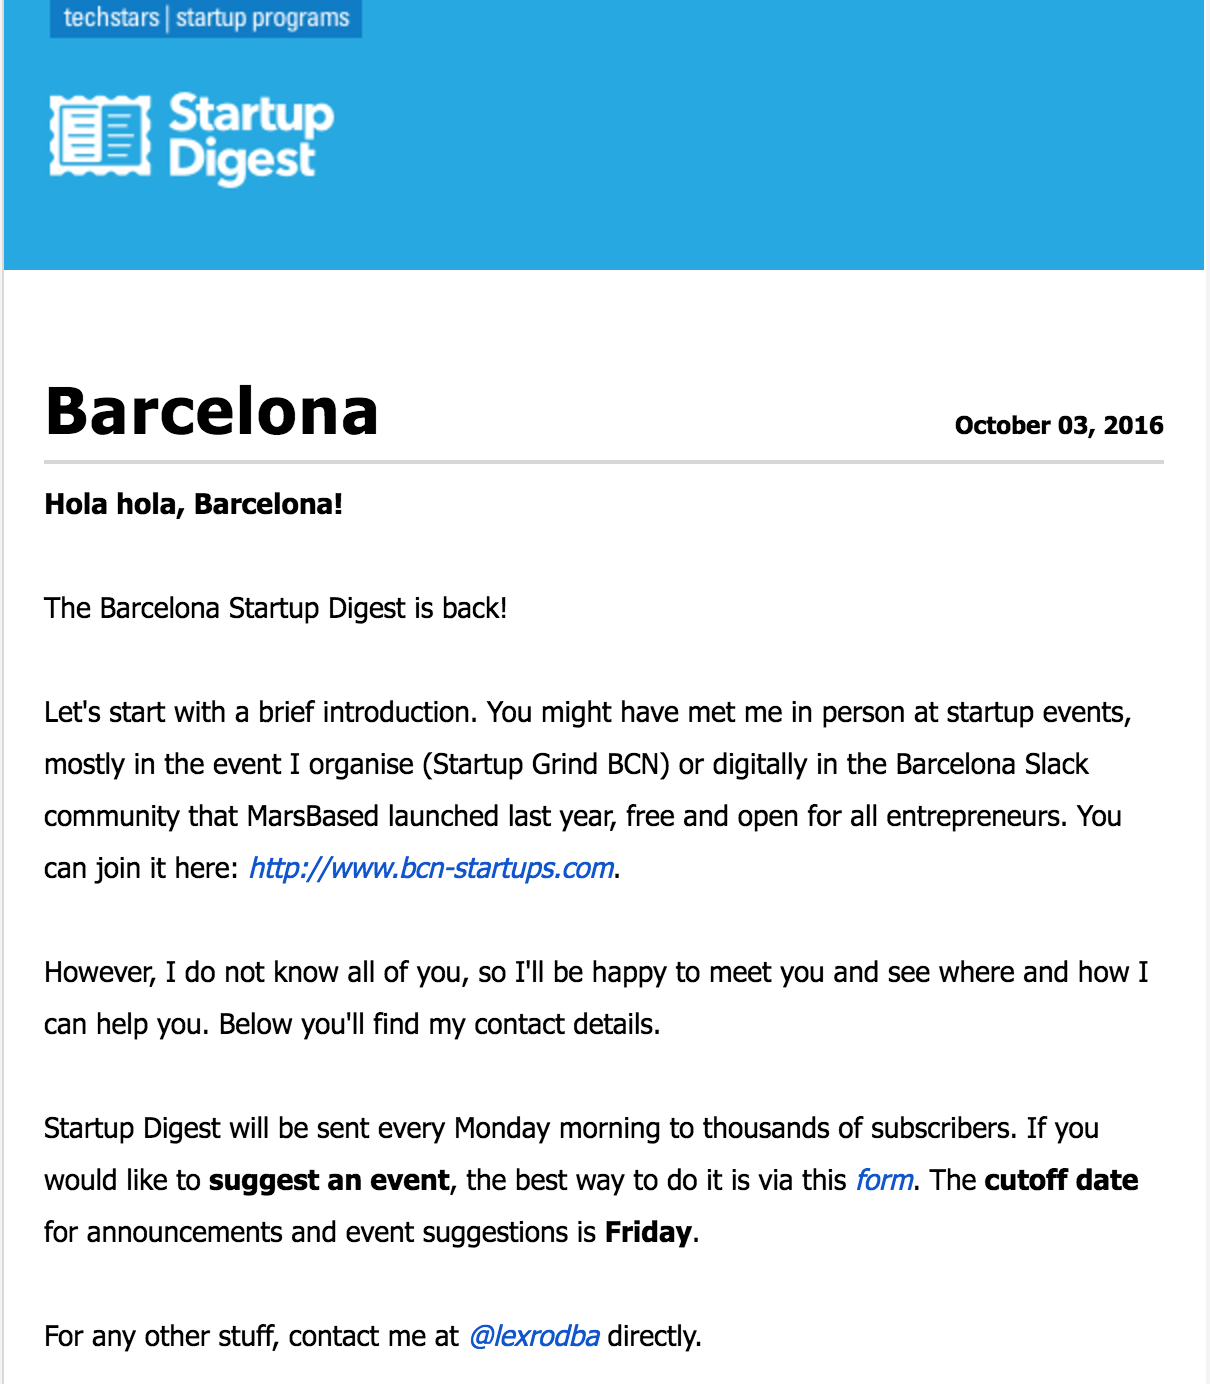 Startup Digest Barcelona first email